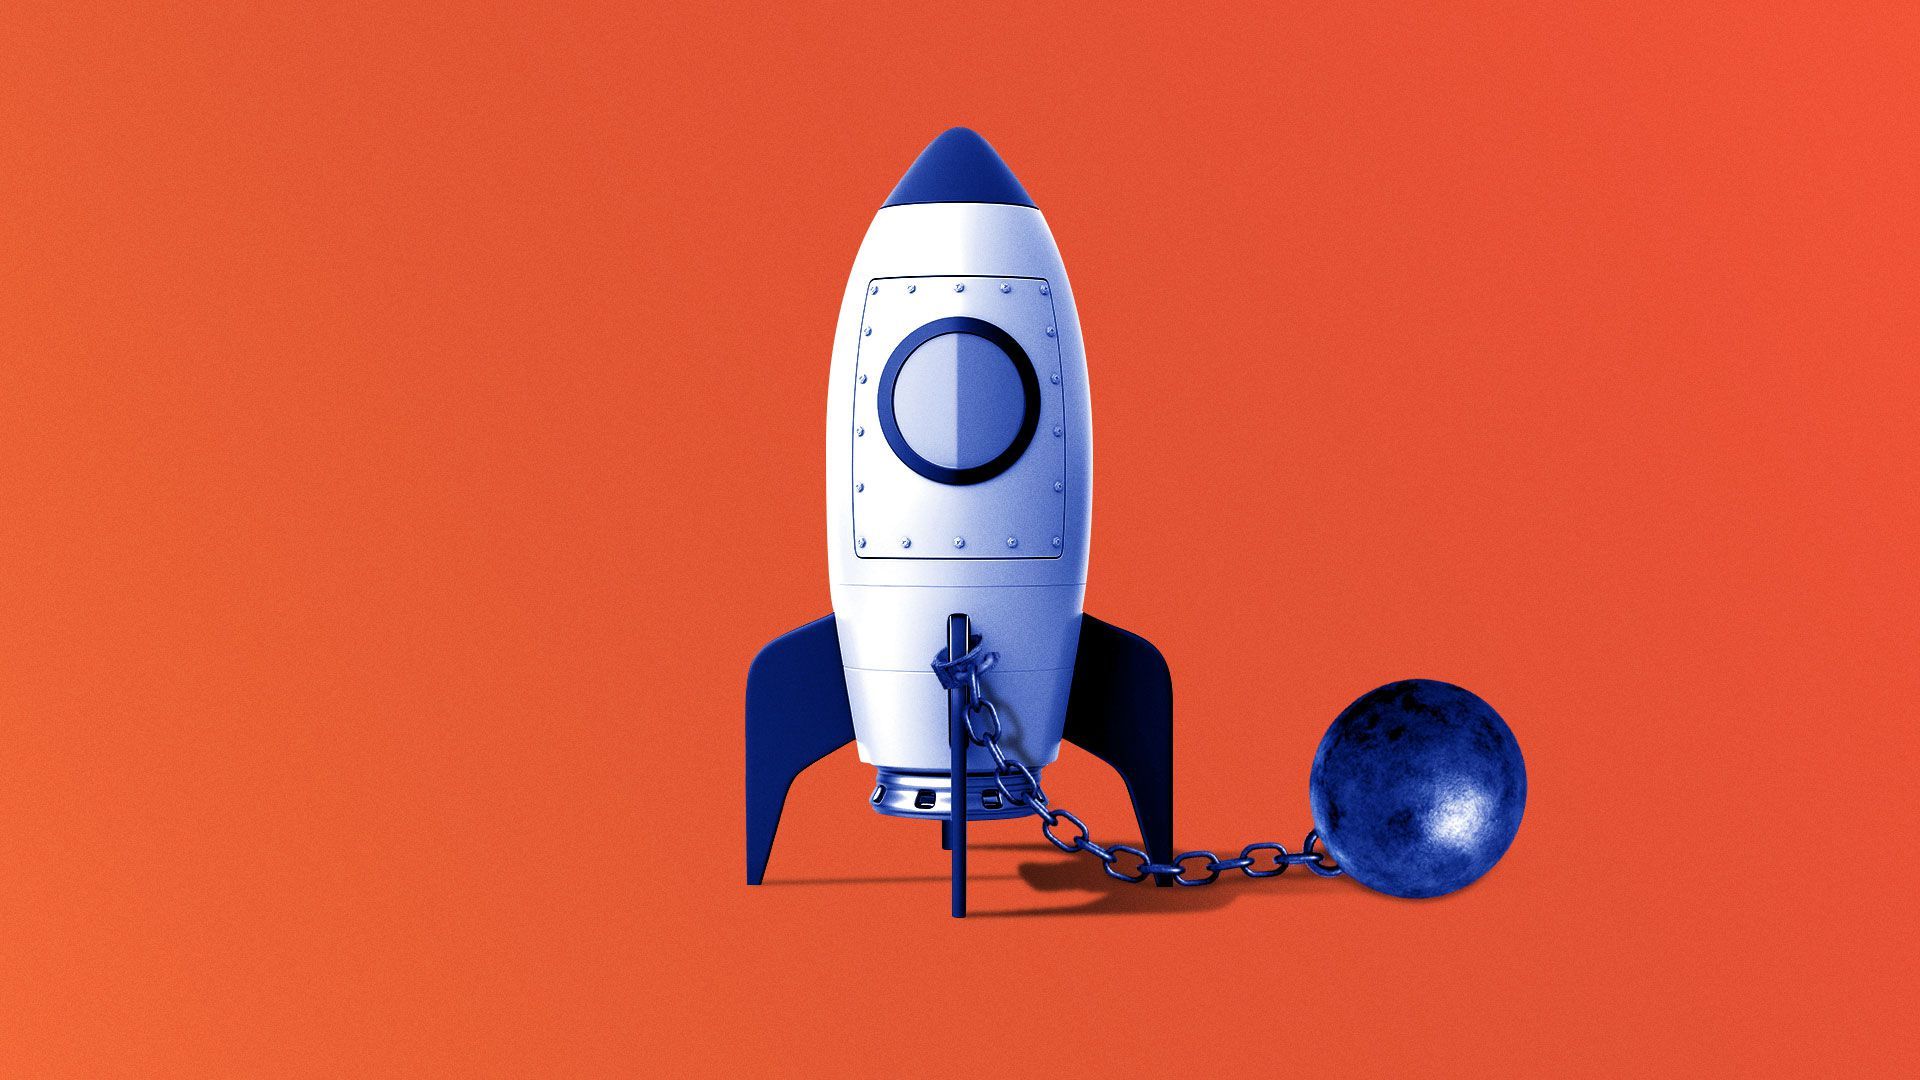 Illustration of rocket ship with a ball and chain